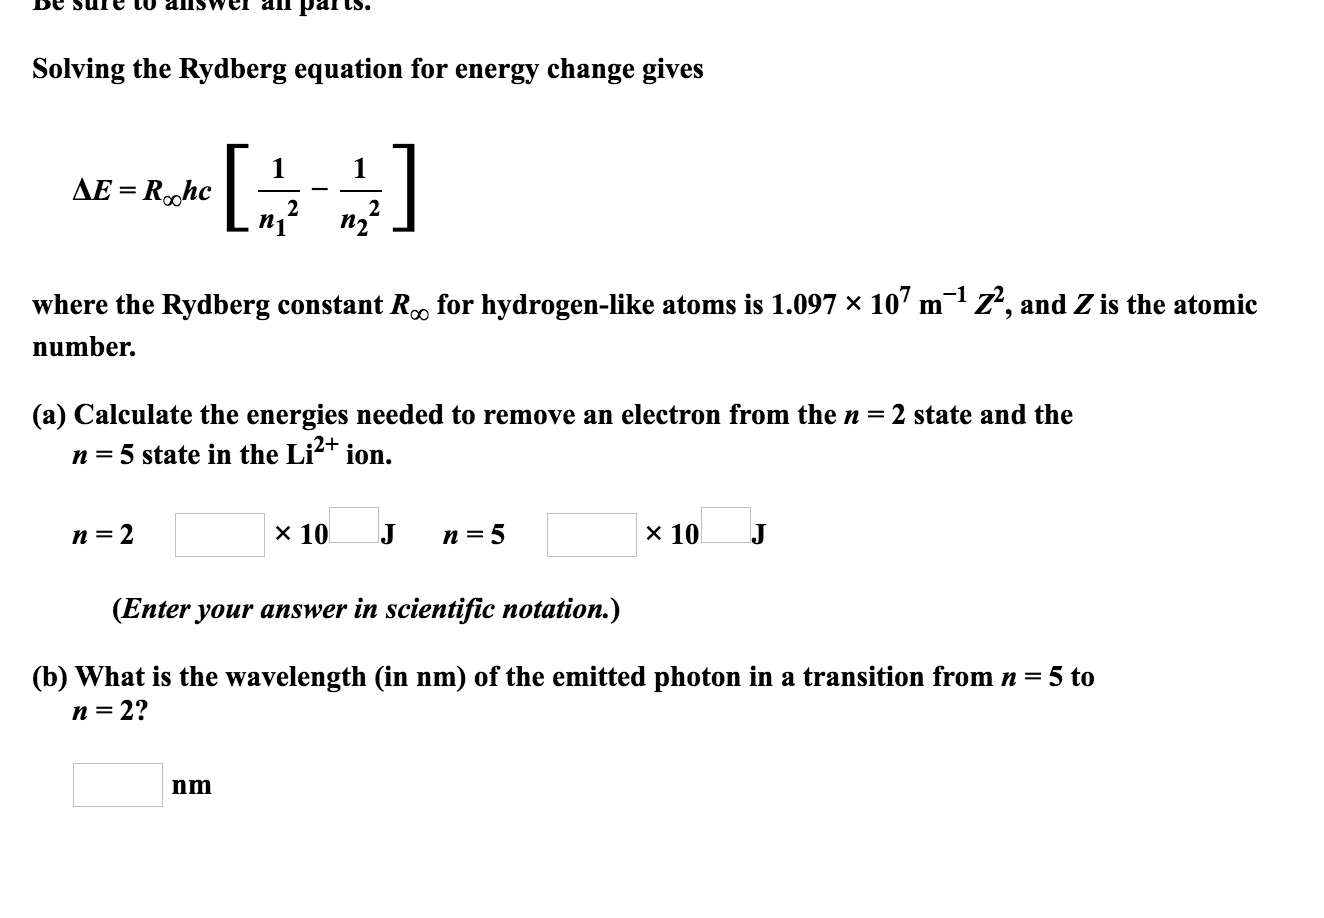 ап ра
Cs.
Solving the Rydberg equation for energy change gives
]
1
AE Rohc
2
2
where the Rydberg constant R0 for hydrogen-like atoms is 1.097 x 107 m
Z, and Z is the atomic
number.
(a) Calculate the energies needed to remove an electron from the n = 2 state and the
ion.
n =5 state in the Li
х 10
x 10
п 3D 2
J
п %3D5
(Enter your answer in scientific notation.)
(b) What is the wavelength (in nm) of the emitted photon in a transition from n = 5 to
n = 2?
nm
